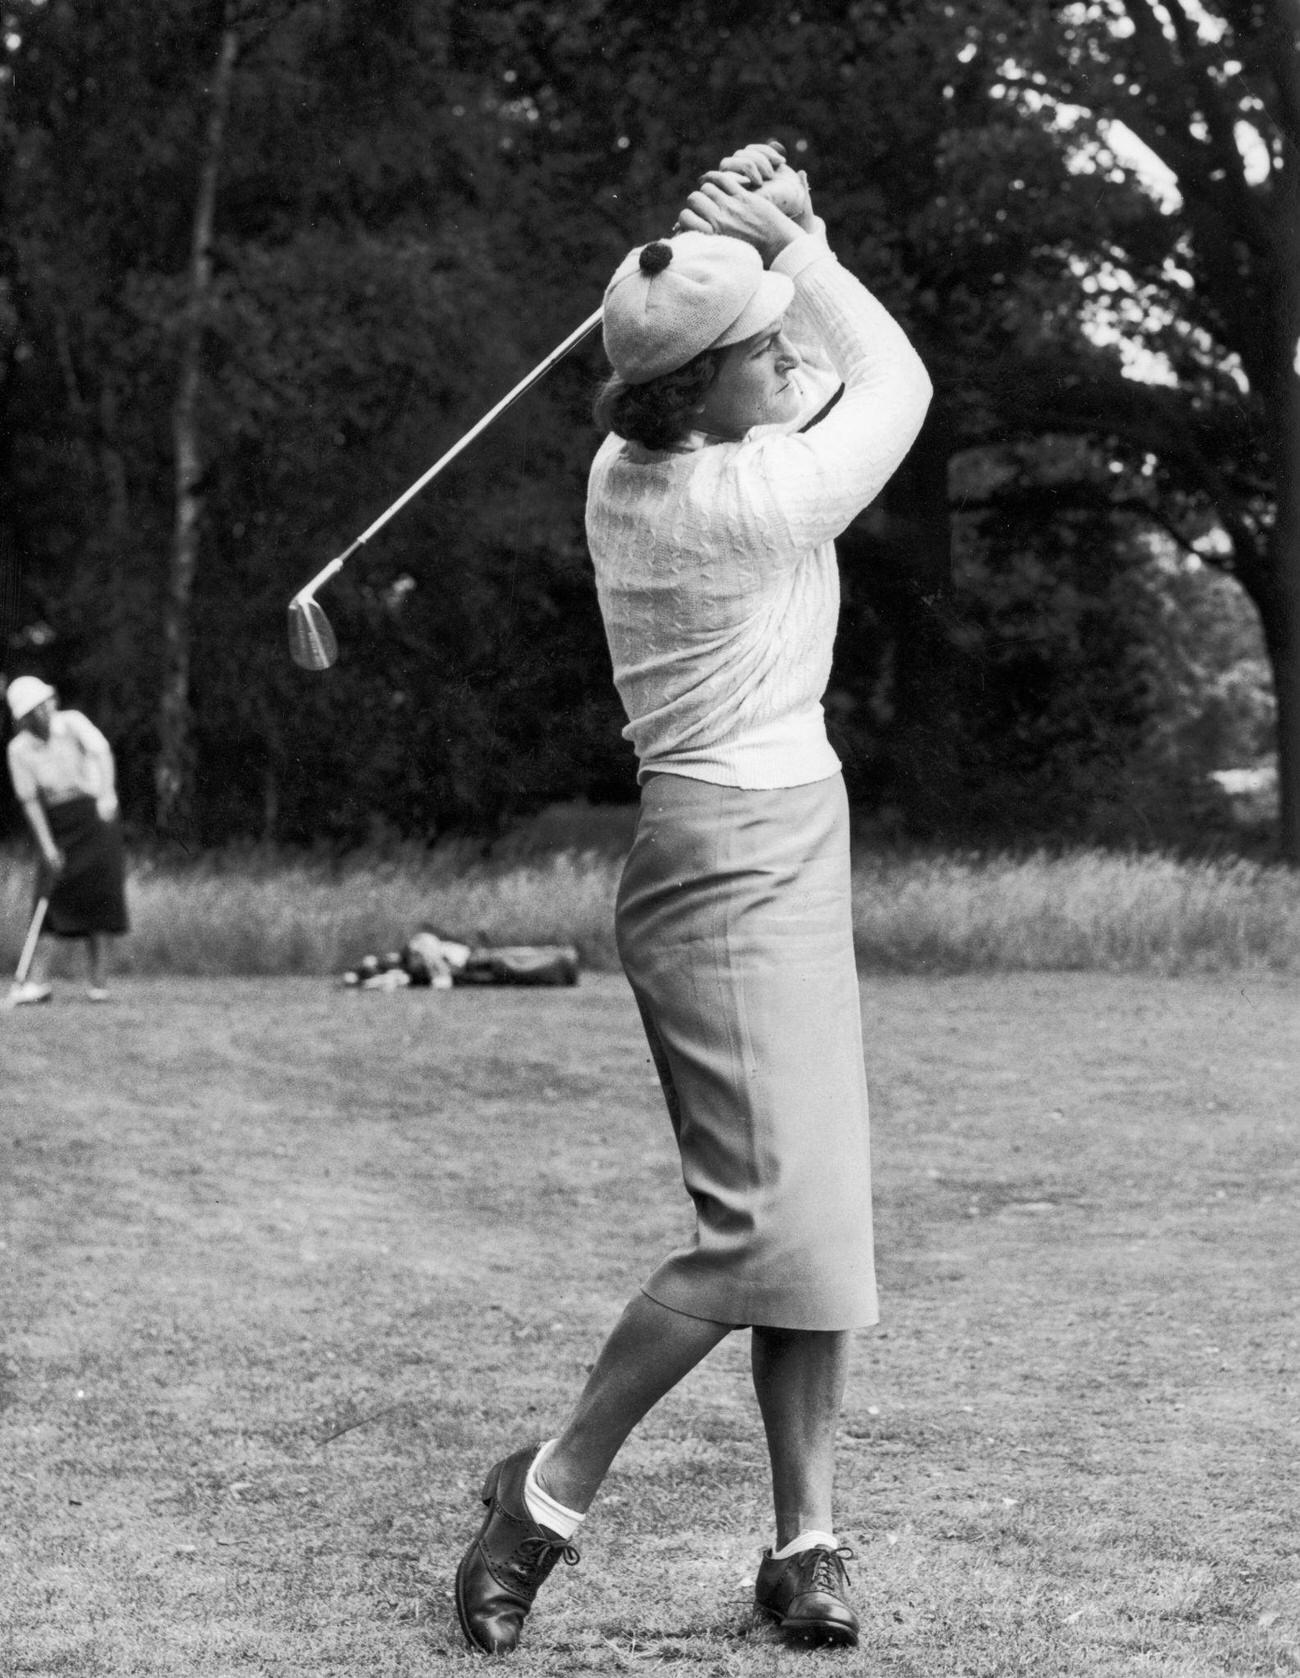 Babe Zaharias driving off, open tournament at Wentworth, July 16, 1931.